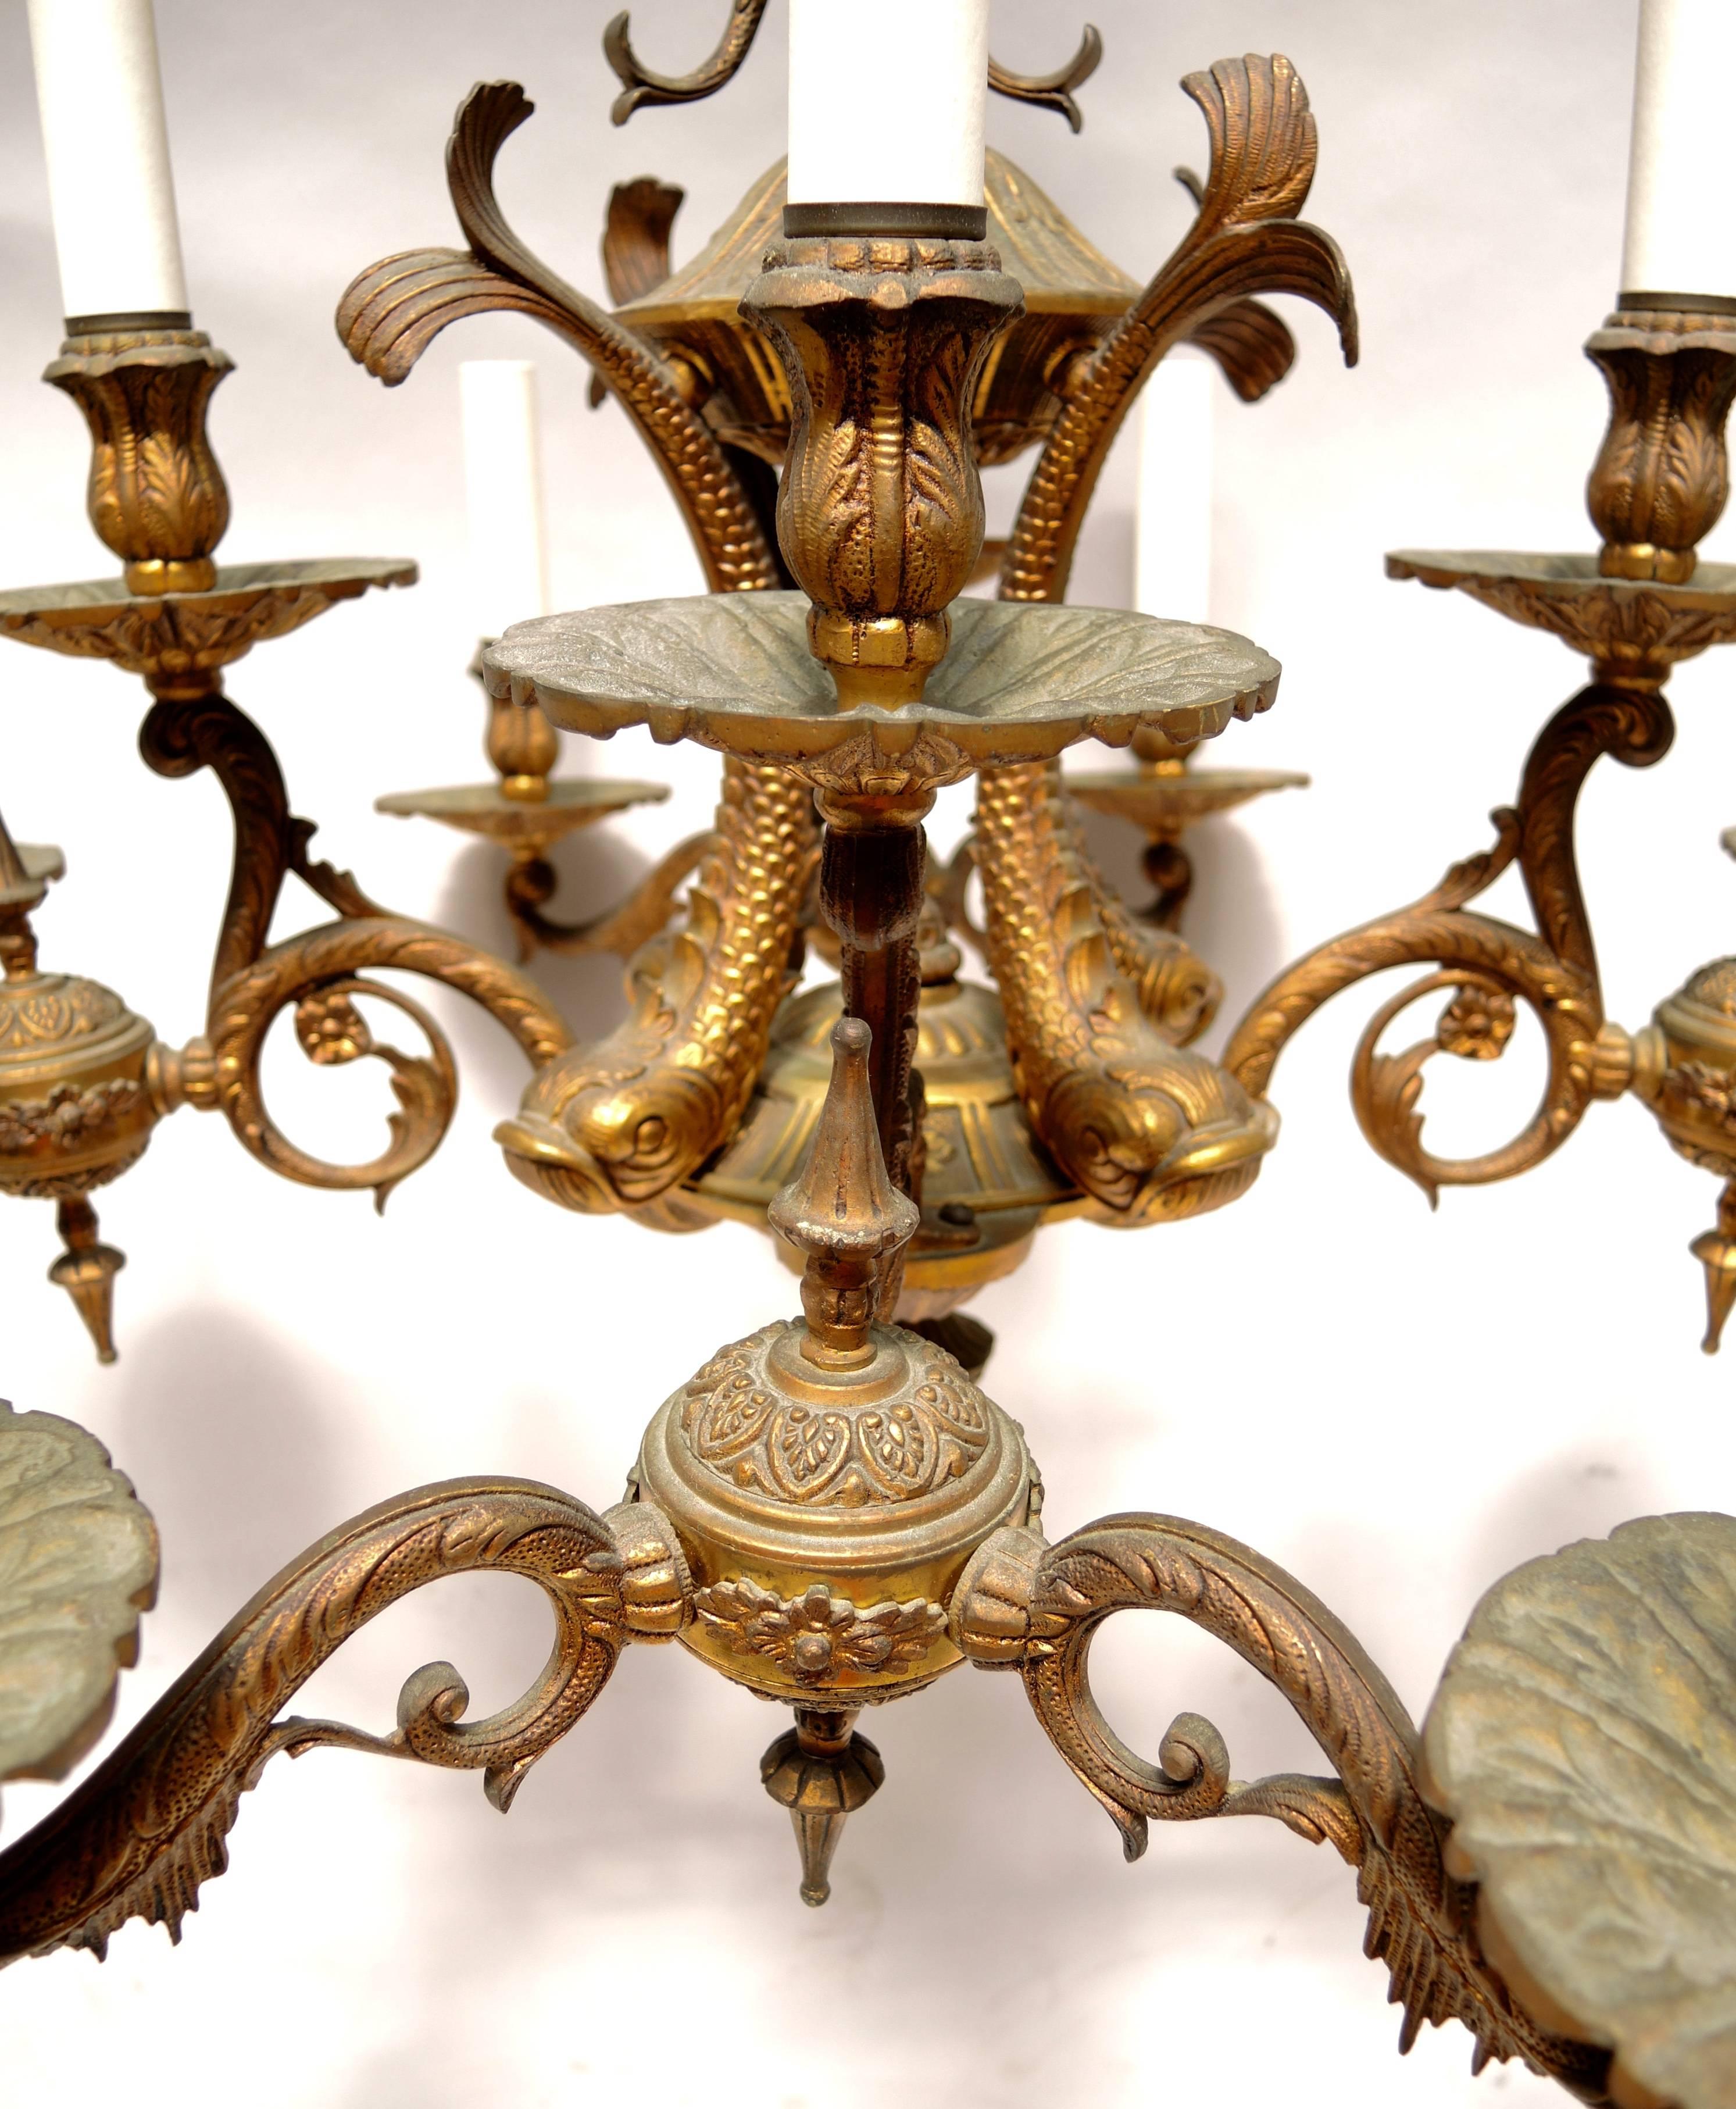 20th Century Twelve-Arm French Bronze Grotto Chandelier with Seahorses, Shells and Dolphins